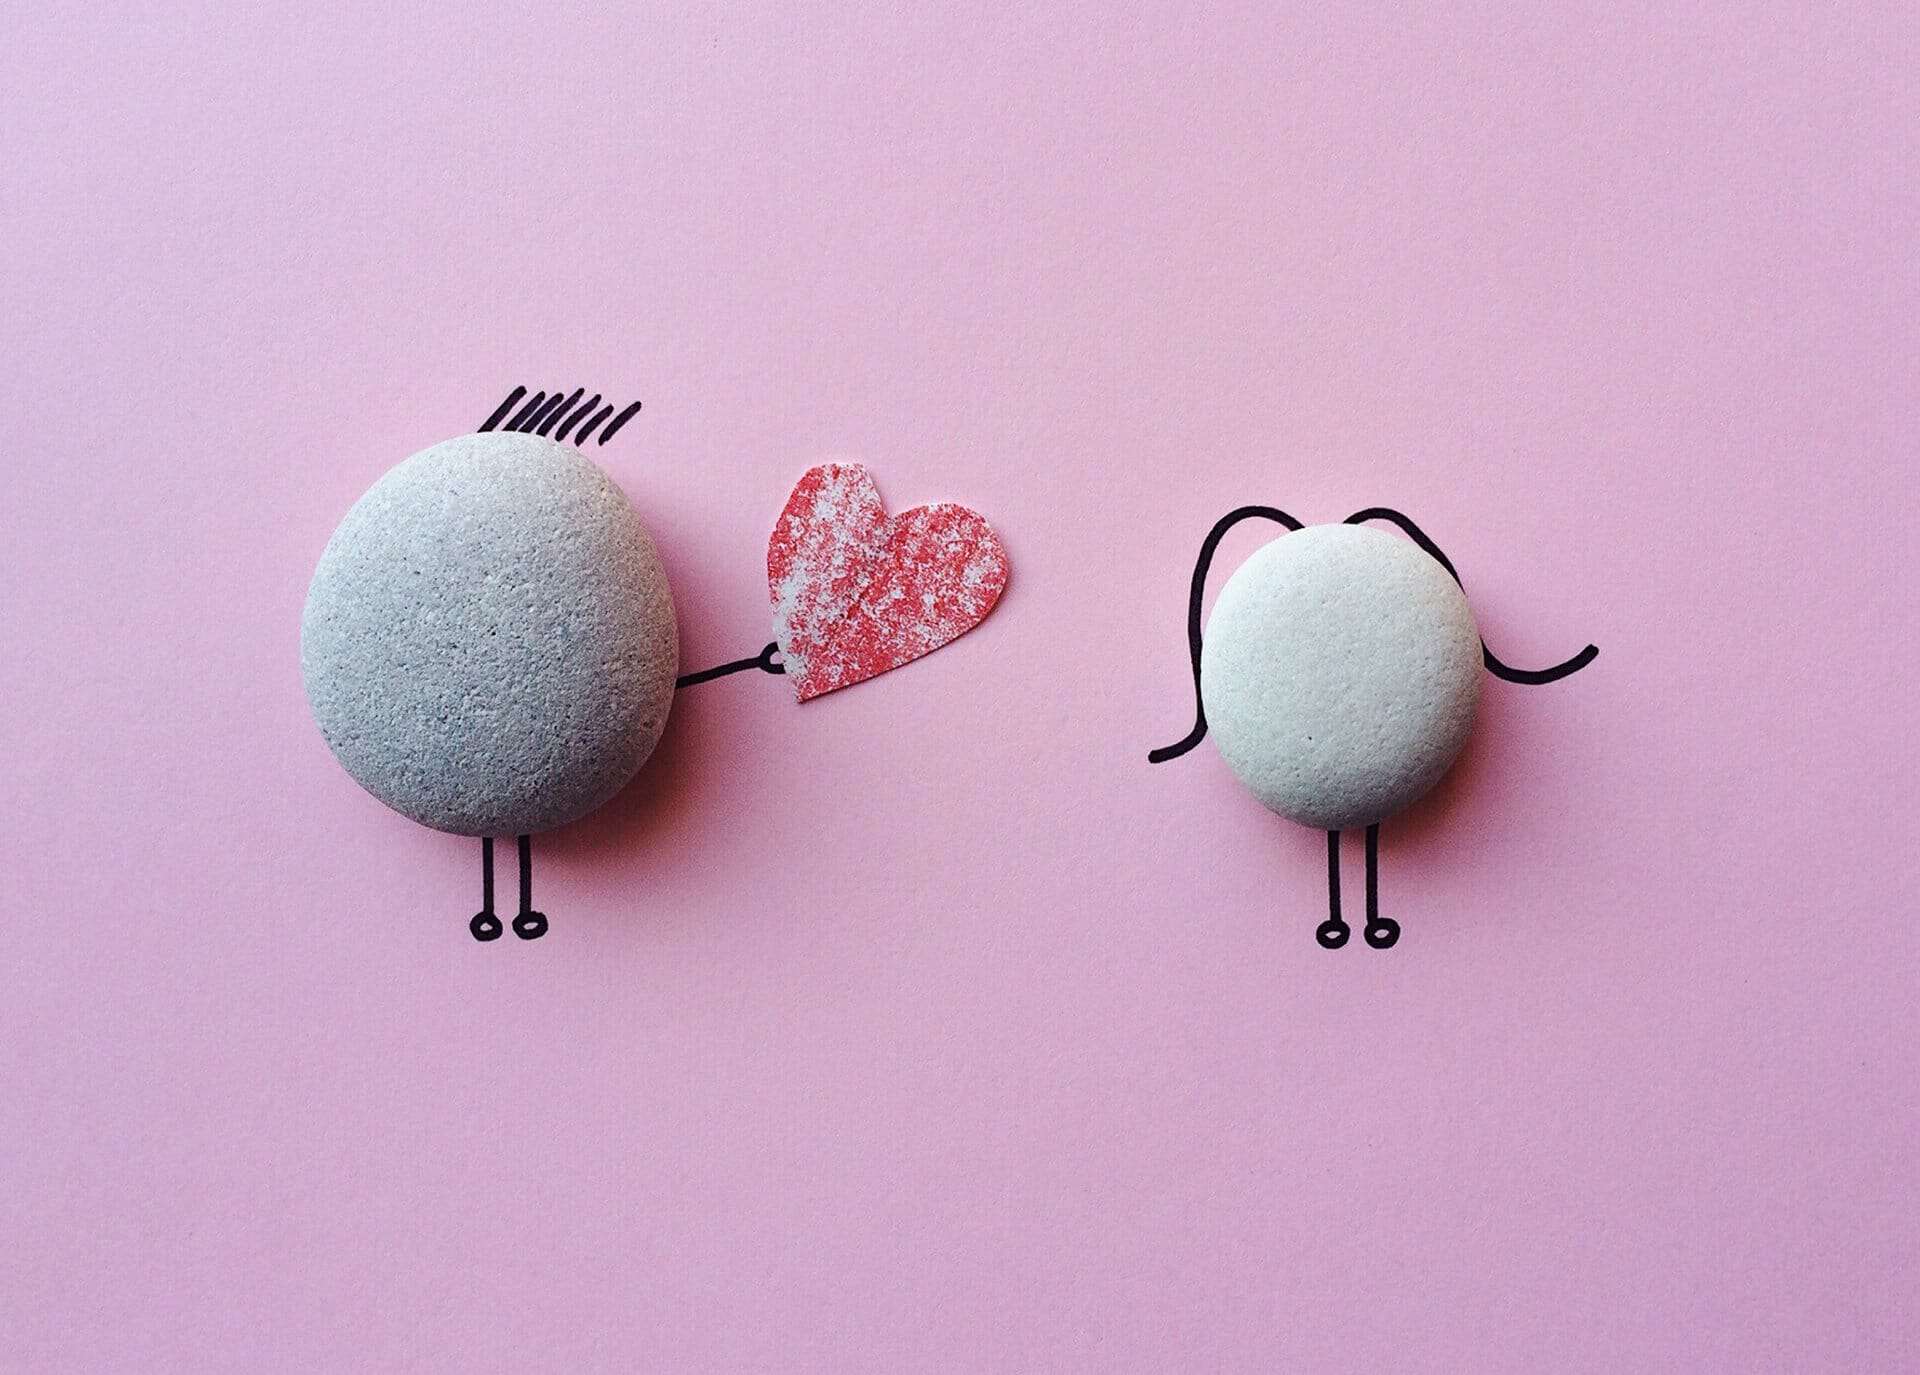 Cute handiwork using pebbles to depict a boy wooing a girl